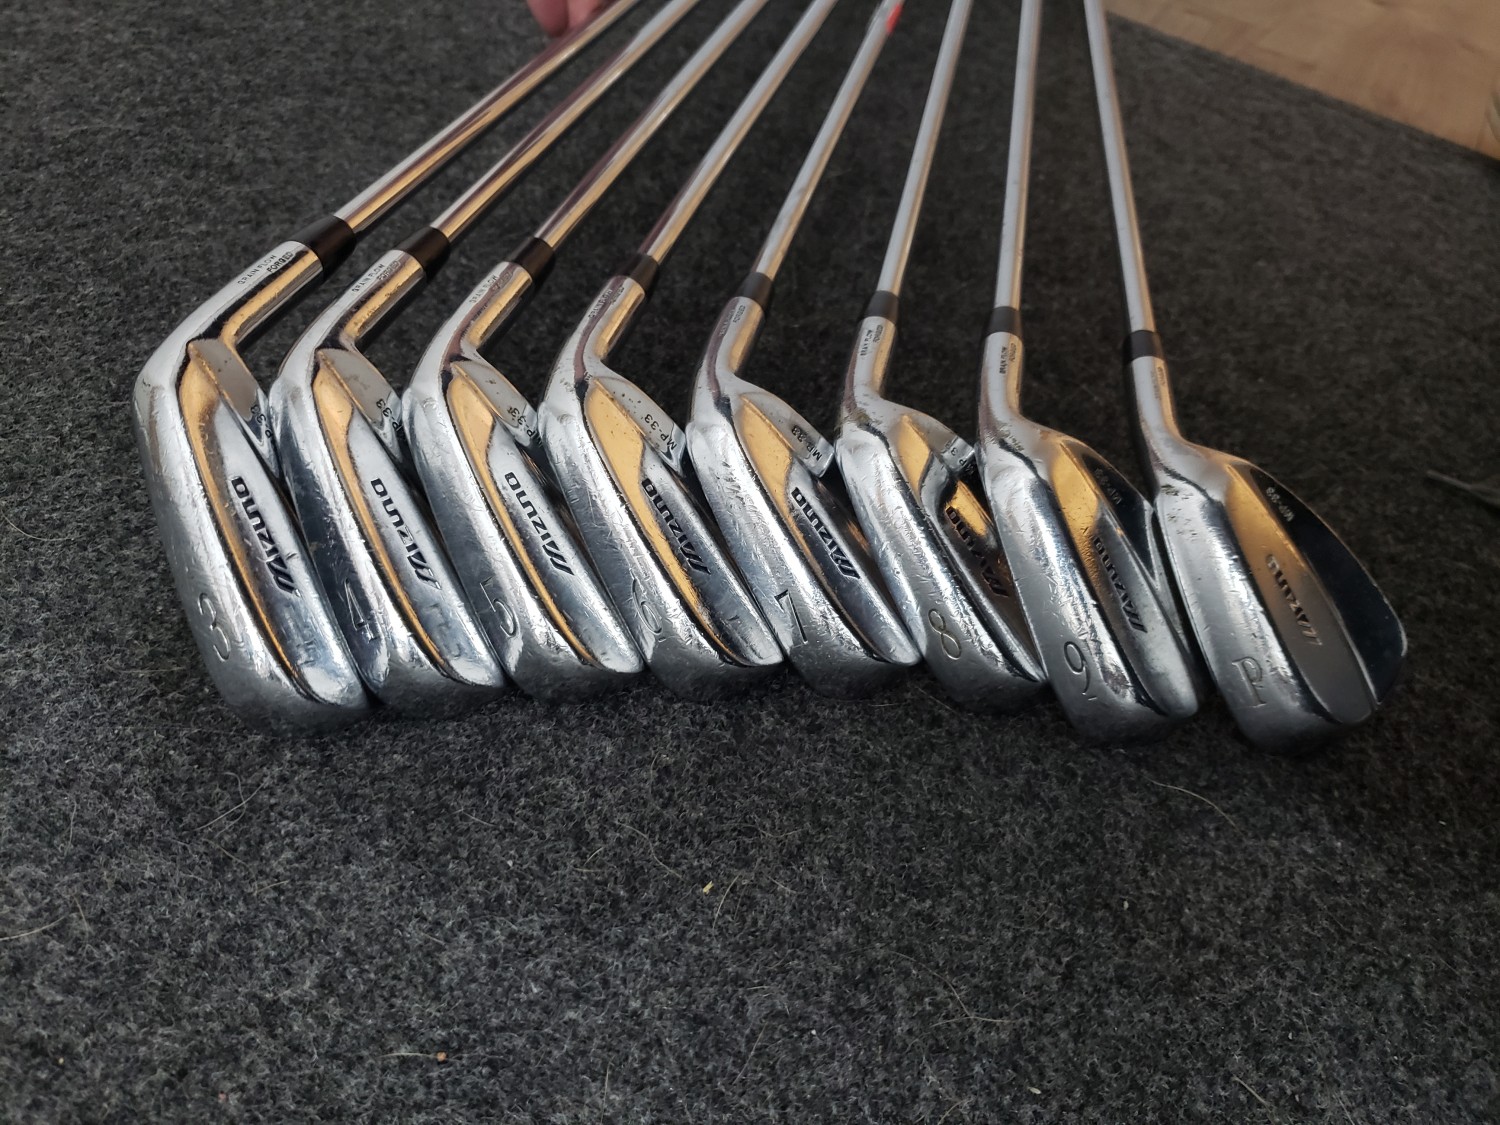 Decoratief kijken mooi zo MP-33 Review 19 years to late - Unofficial Reviews - MyGolfSpy Forum